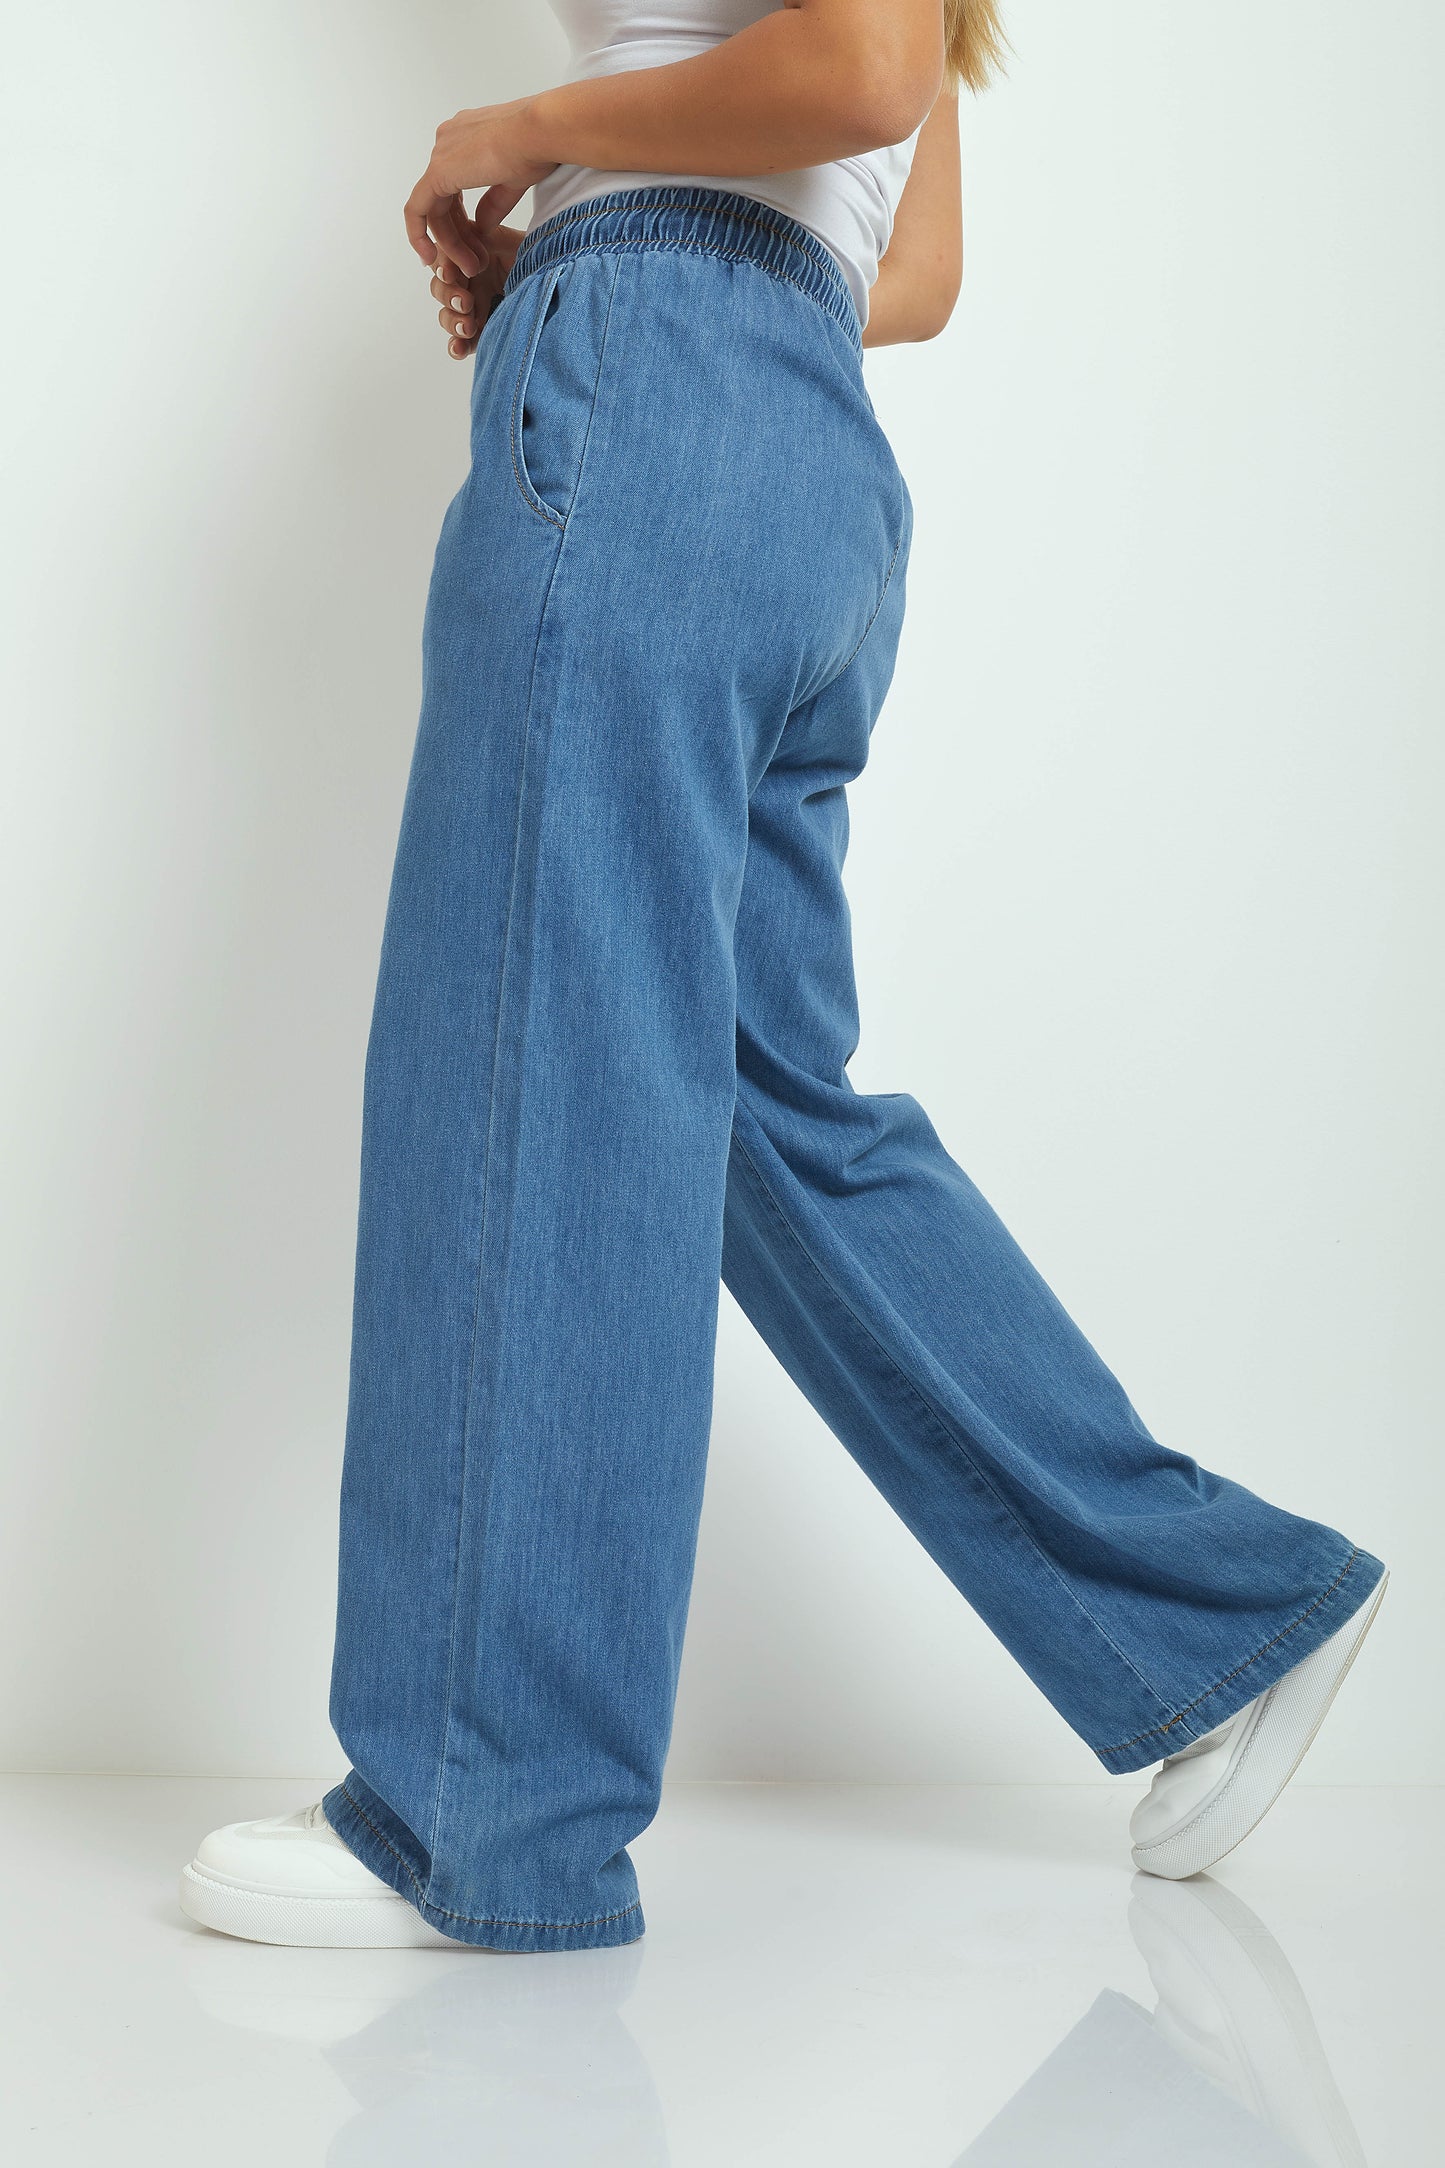 Jeans - Wide-Leg ( WITH TIES )